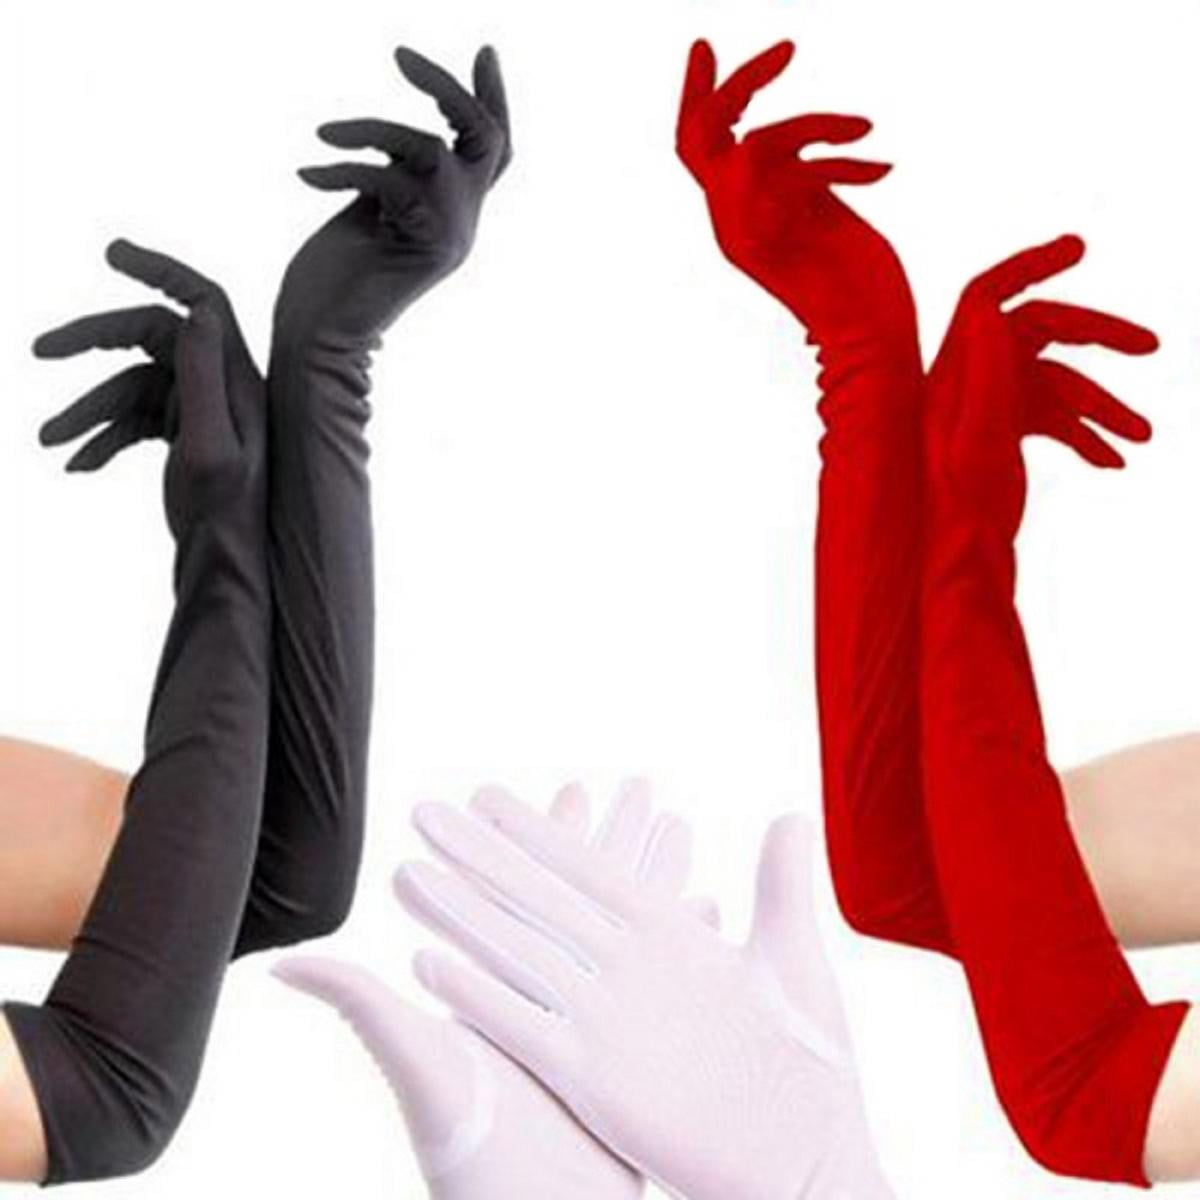 Women's Bridal Lace Gloves Long Fingerless Satin Wedding Gloves Banquet Pageant Party Gloves Special Occassion Accessory 